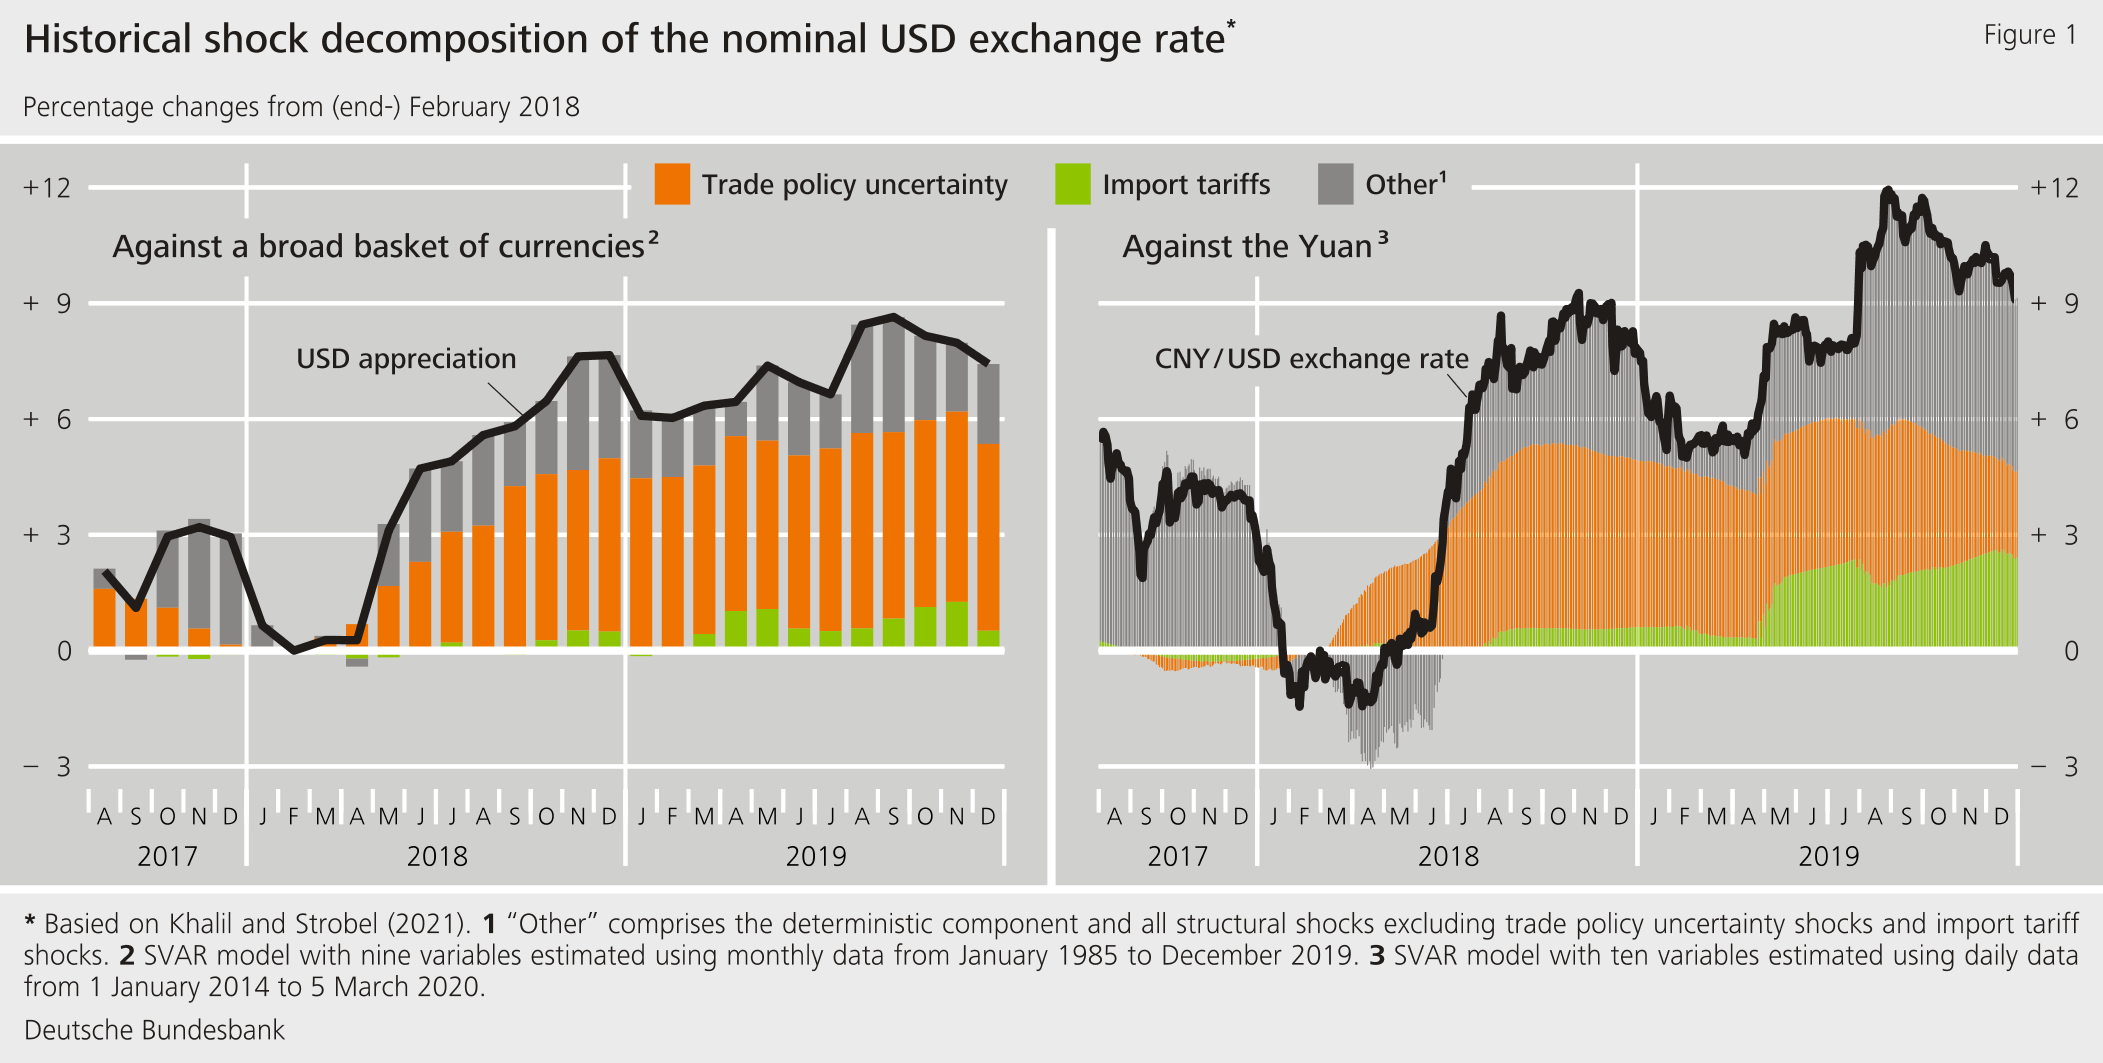 Figure 1: Historical shock decomposition of the nominal USD exchange rate